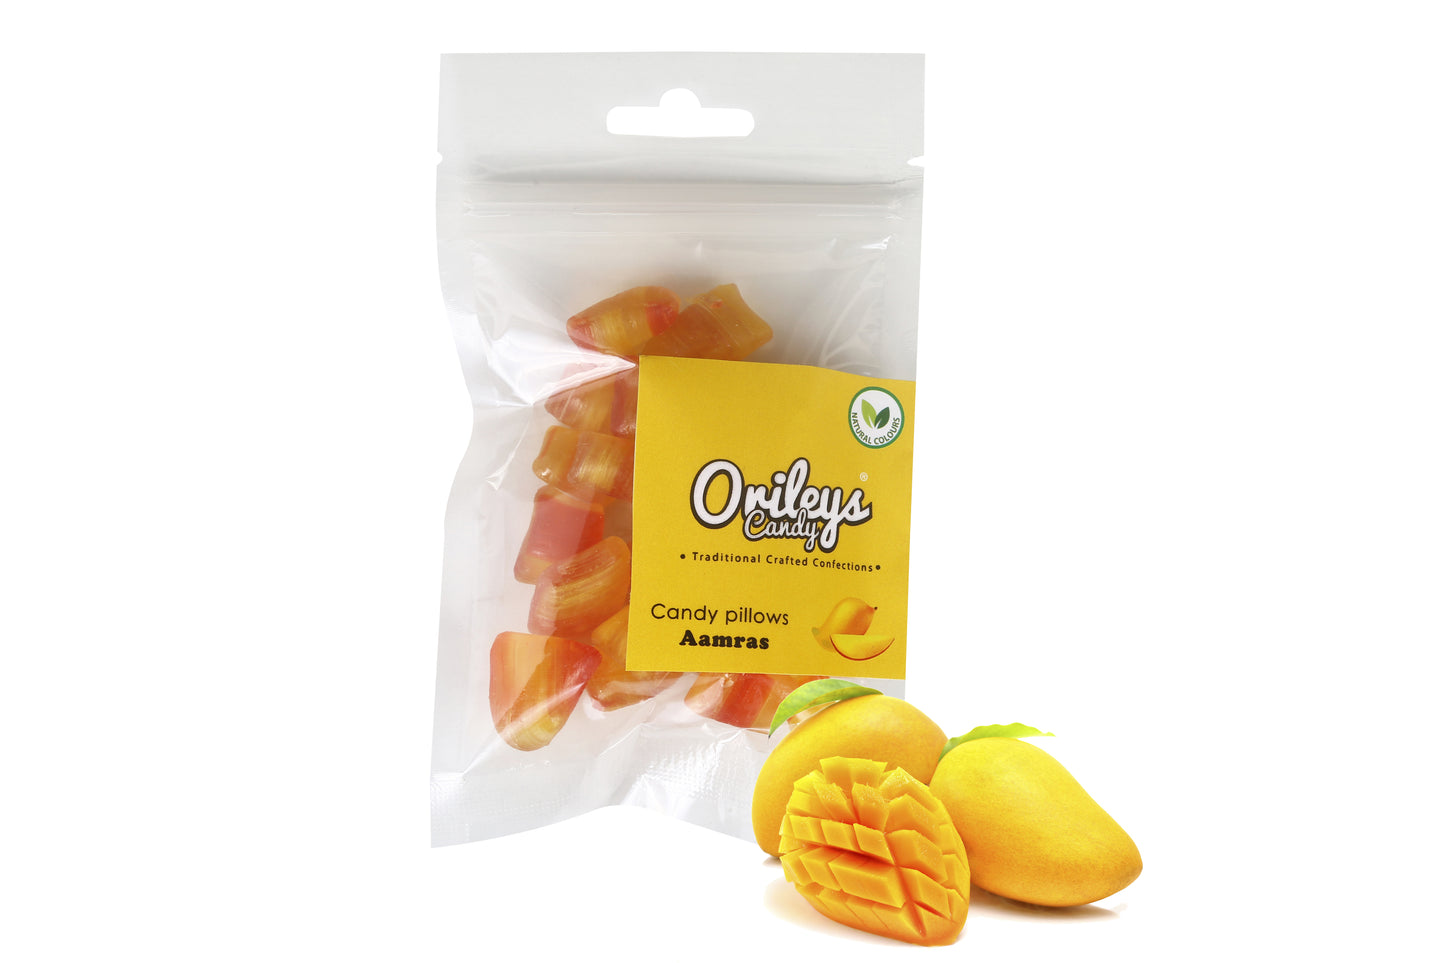 Aamras Pillow Candy | Pack of 6 | Hard Candy | Orileys